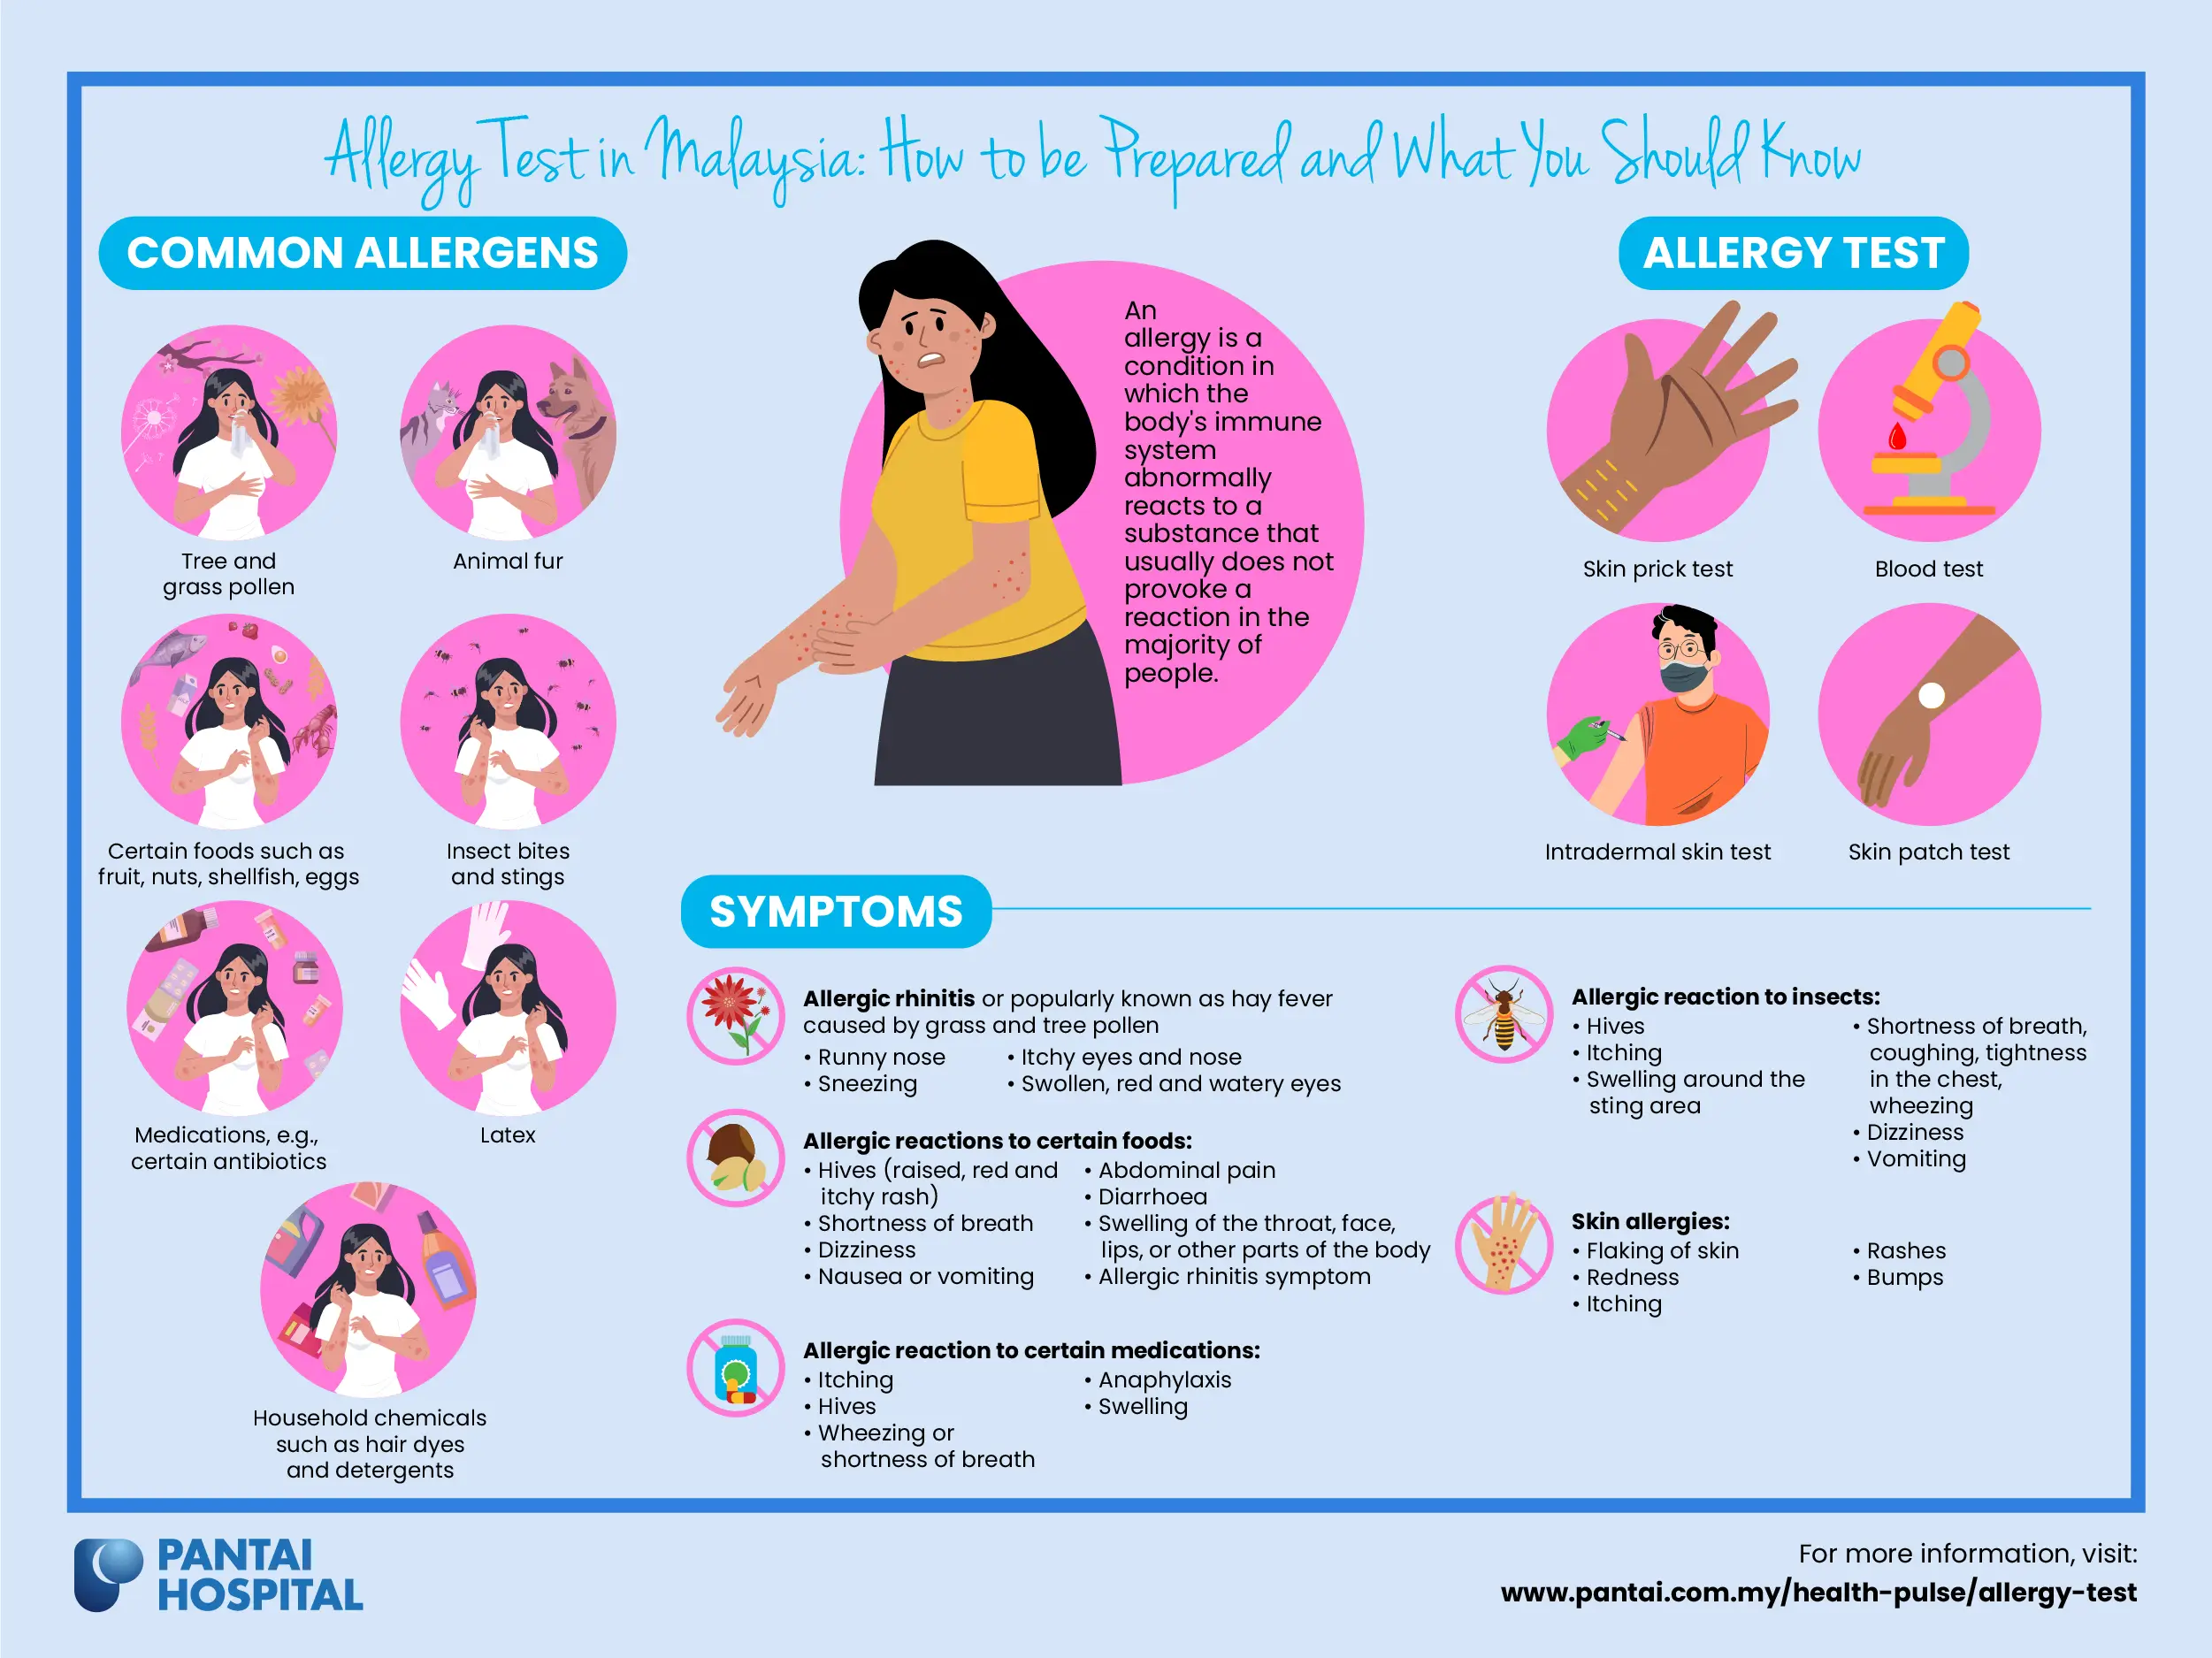 Infographic showing common allergens, symptoms of allergic reactions, and types of allergy tests in Malaysia